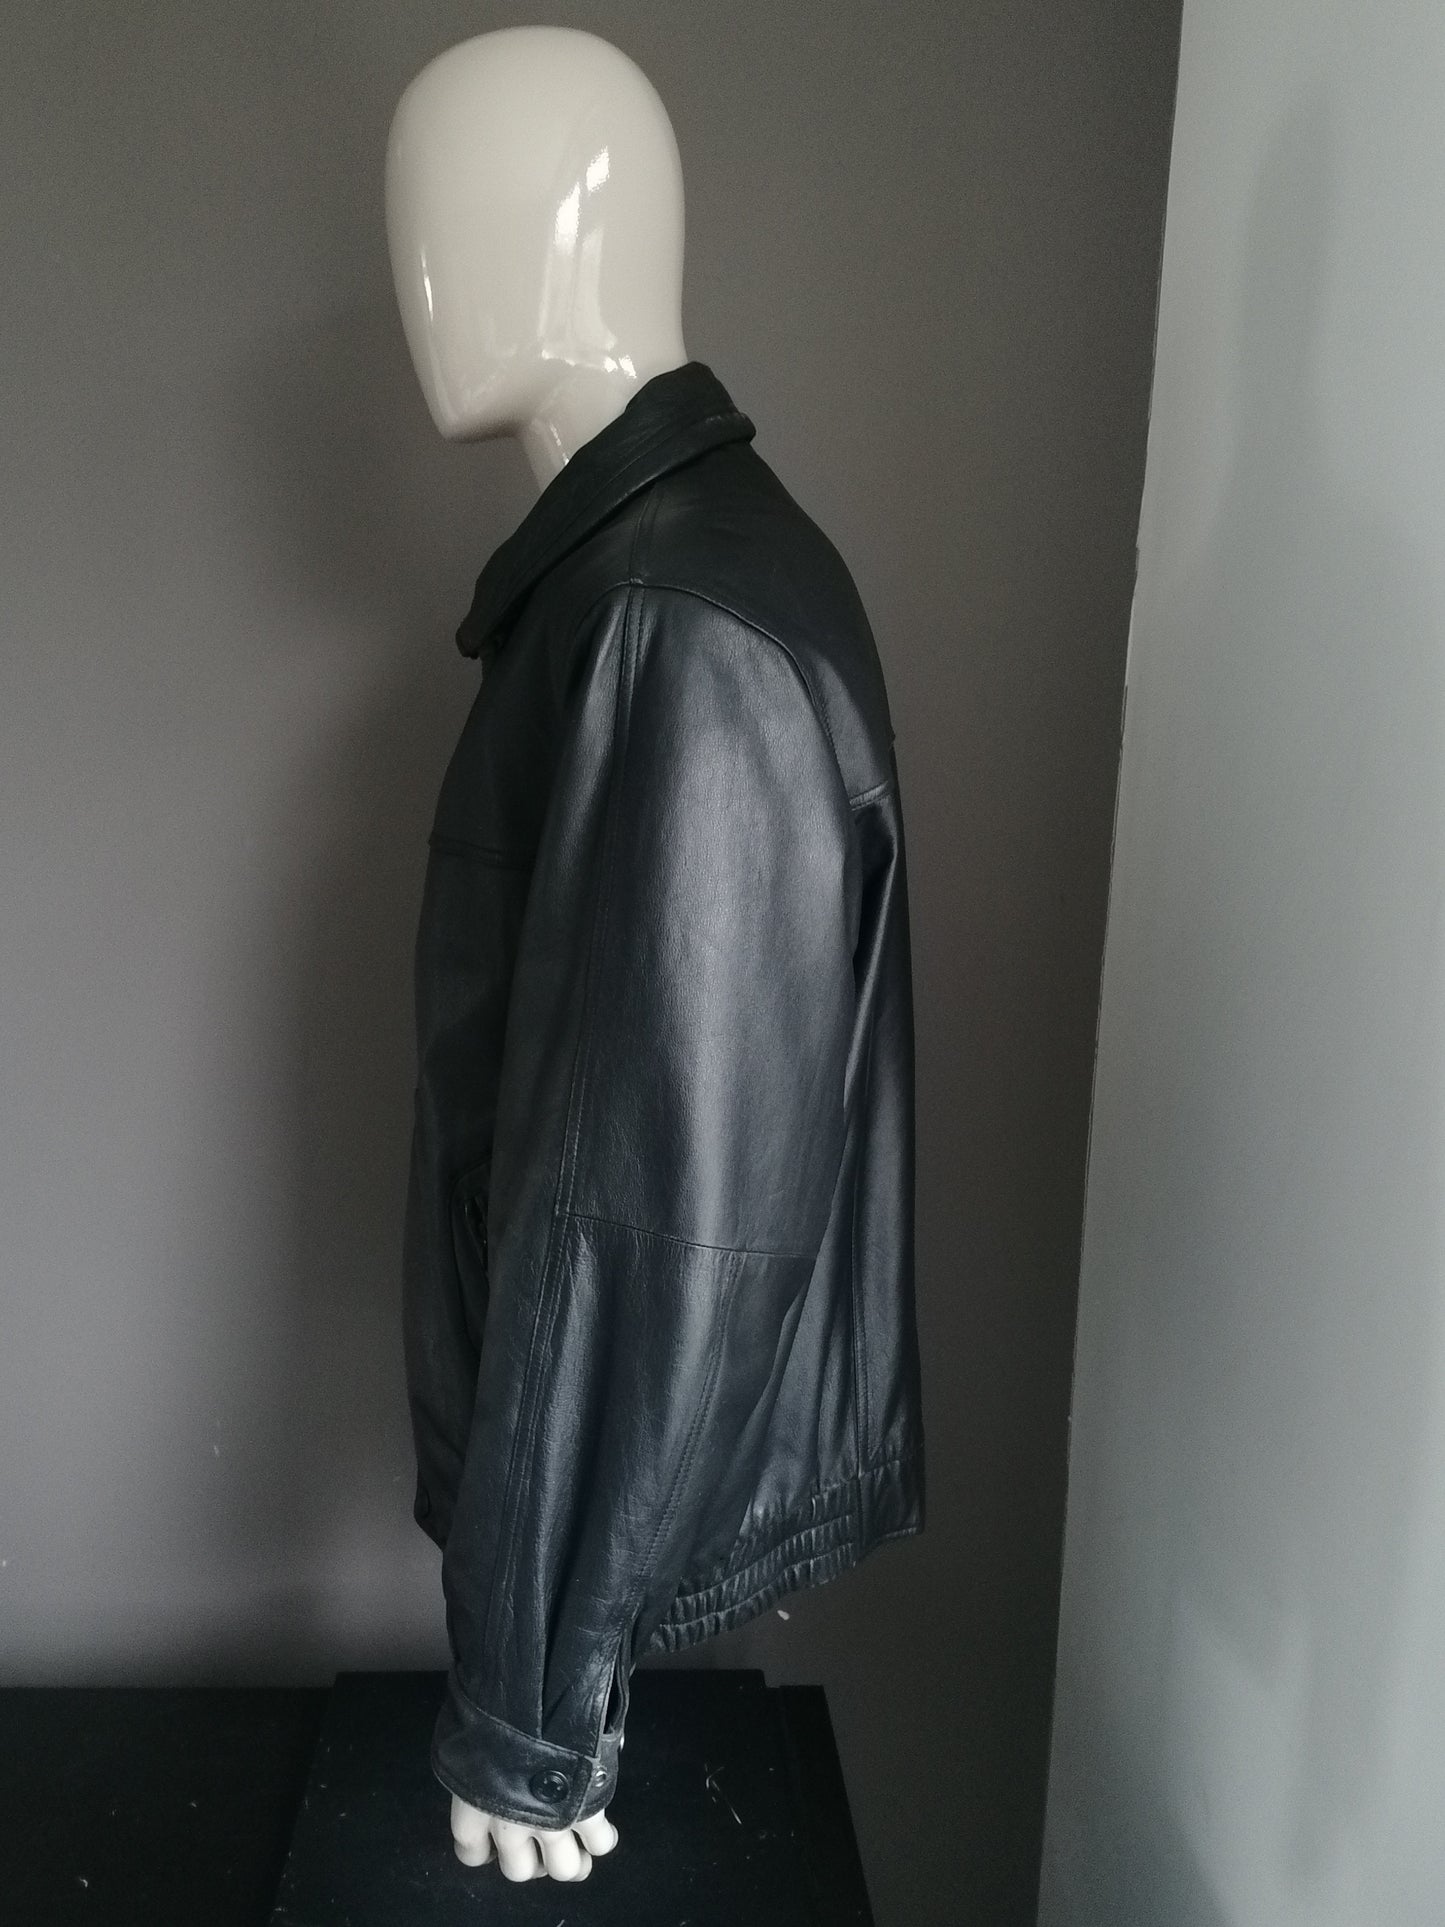 Vintage leather jacket. Lined with double closure and bags. Black colored. Size 56 / XL.